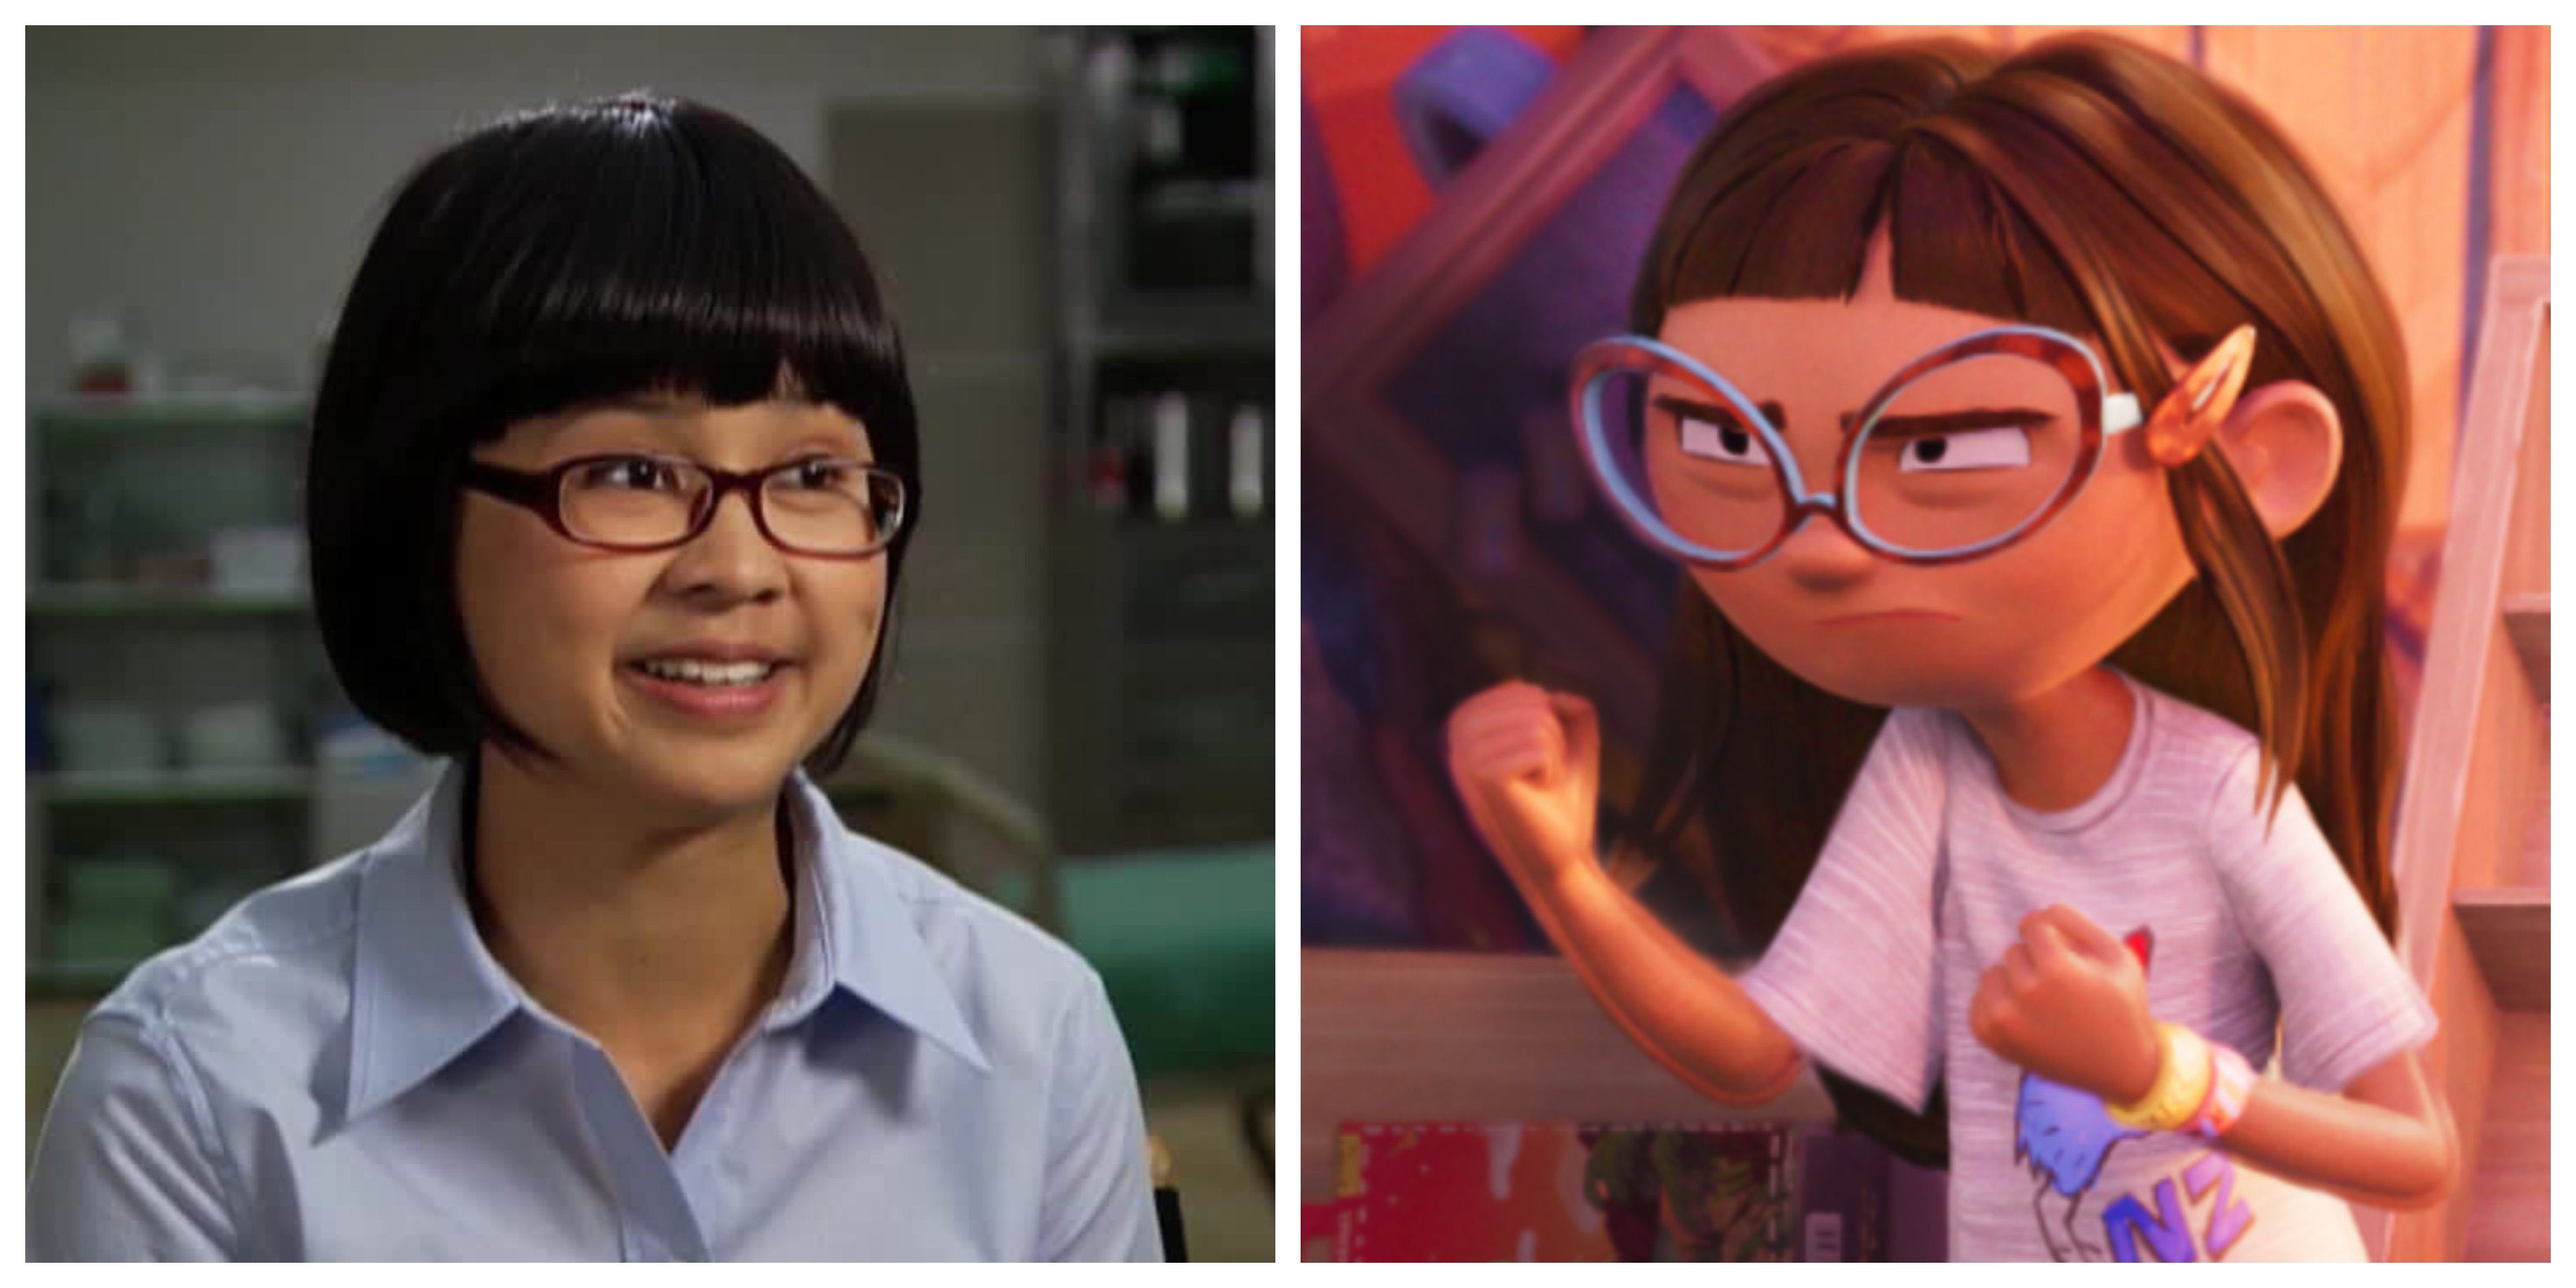 Charlyne Yi as Abby Posey in The Mitchells vs. the Machines on Netflix